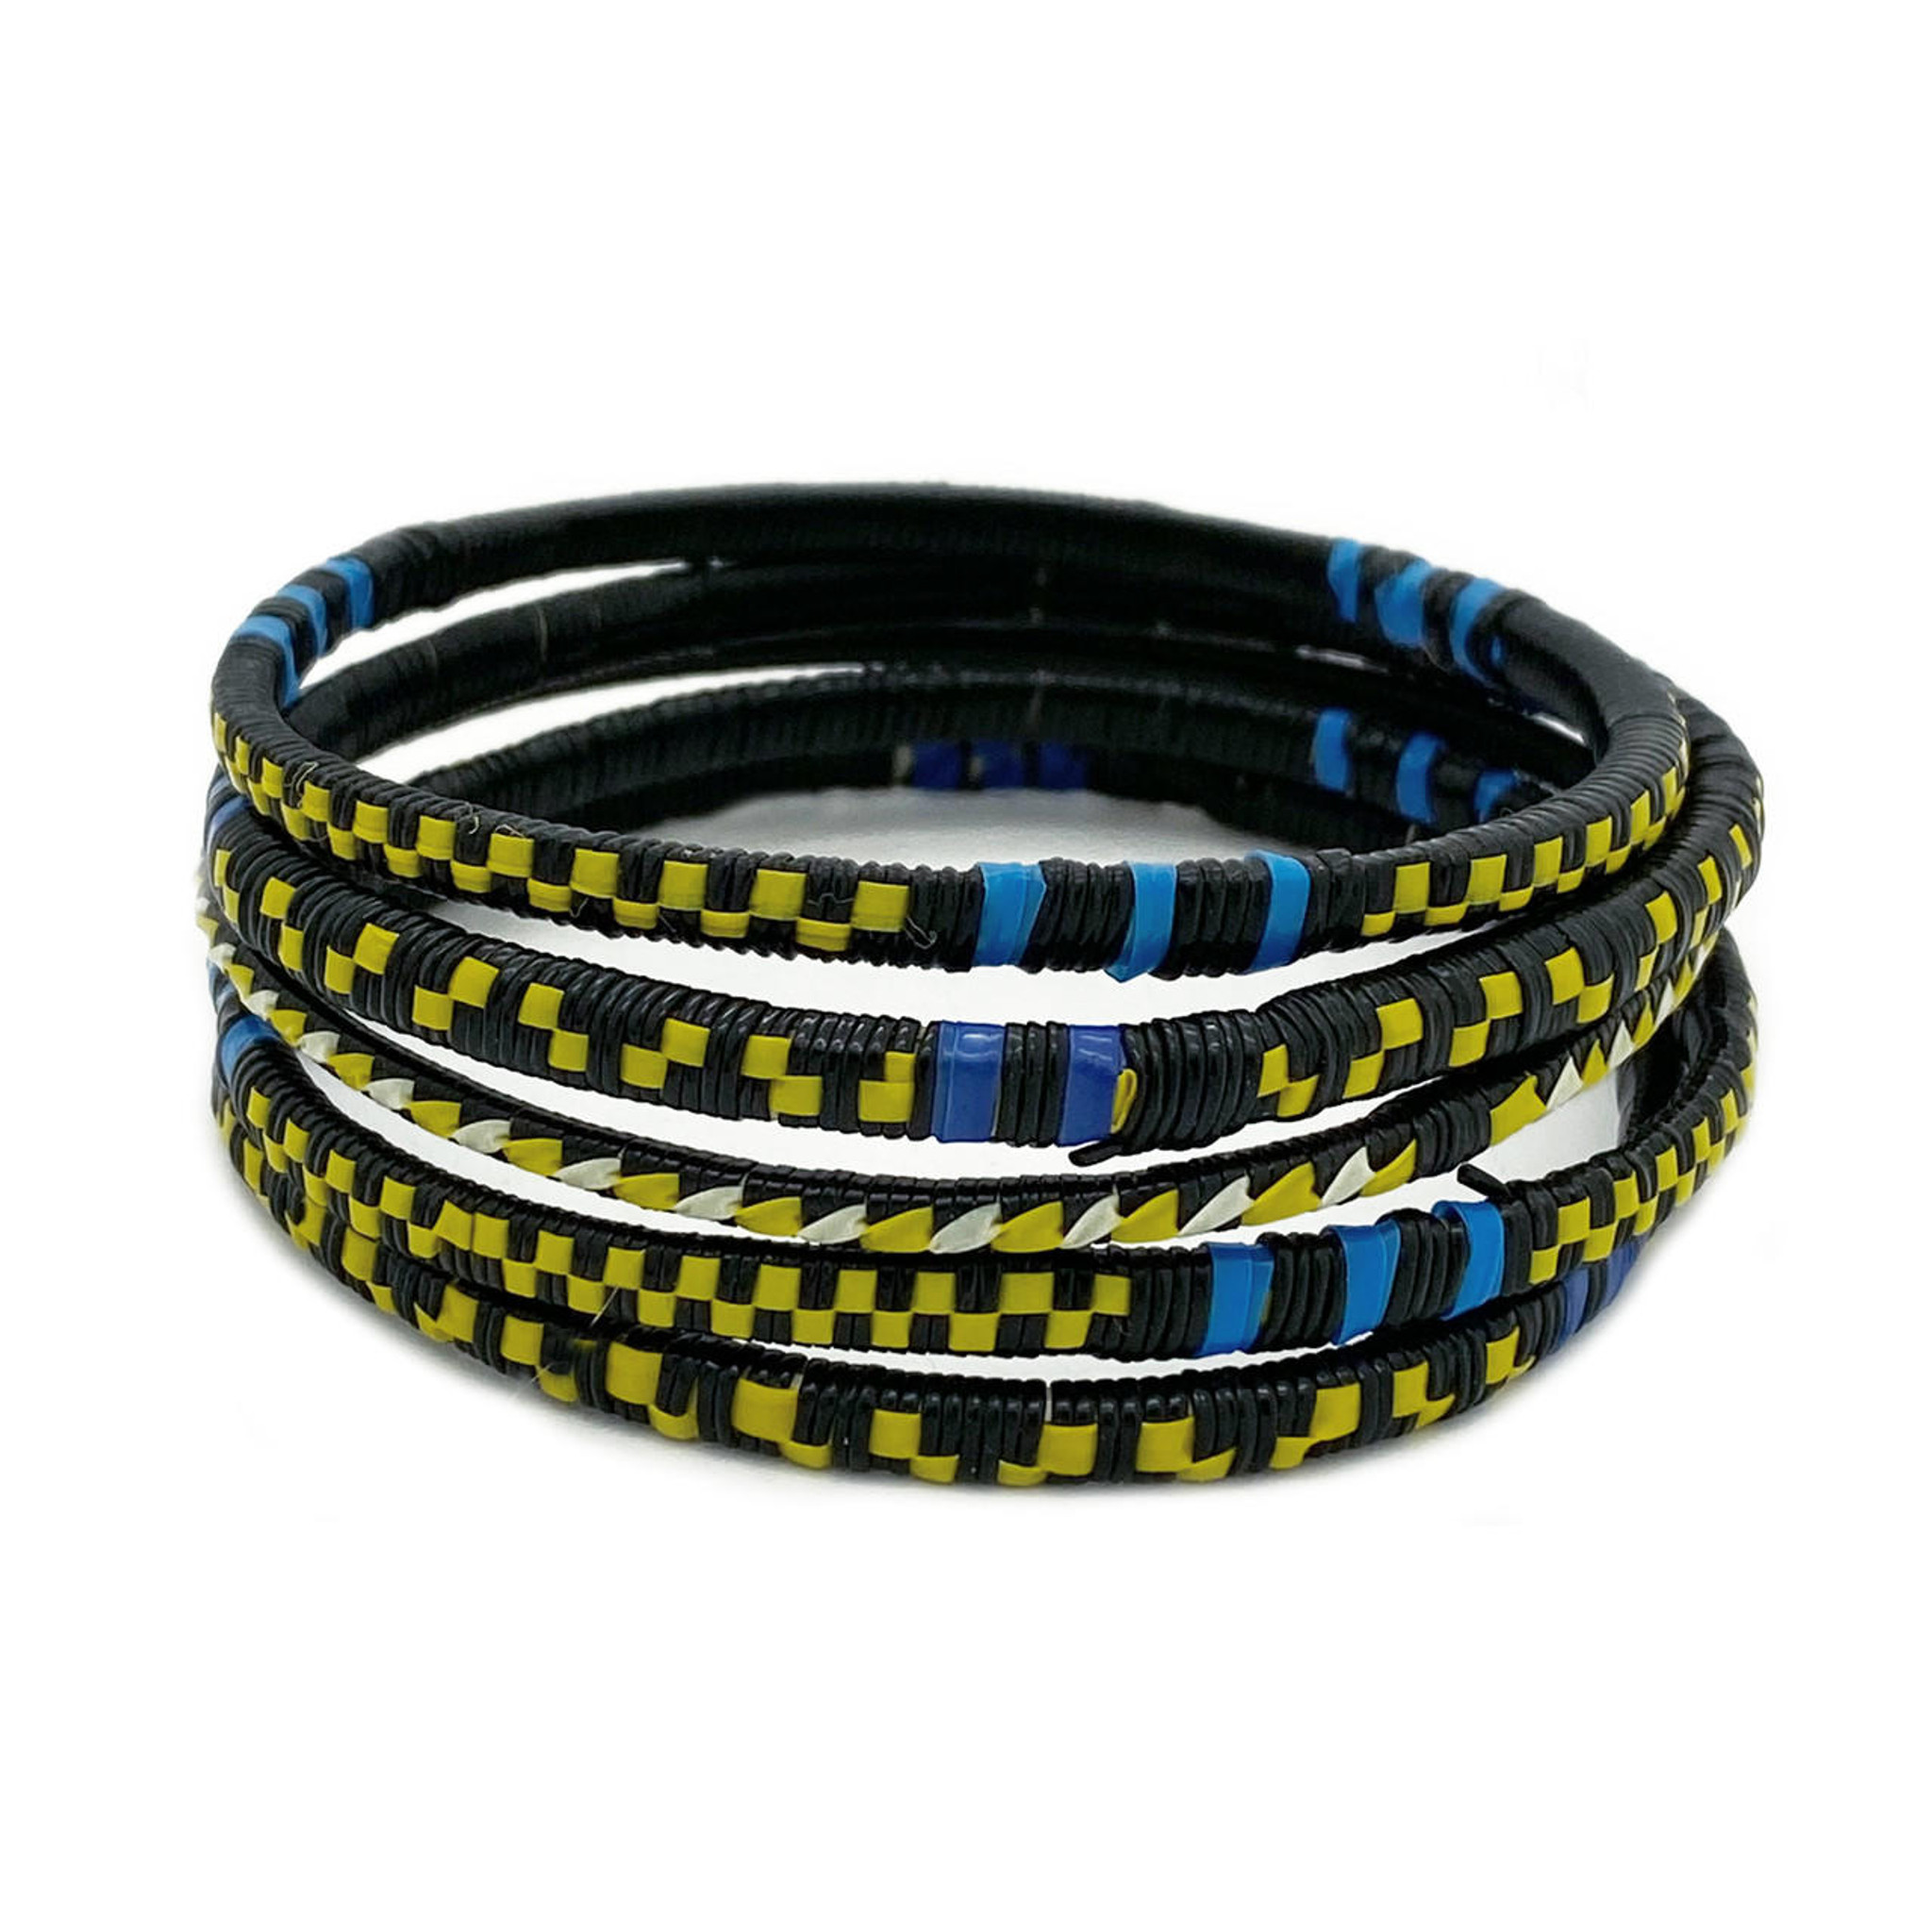 Woven Recycled Plastic Bracelets - Black, Yellow & Blue from Mali, Set of 5